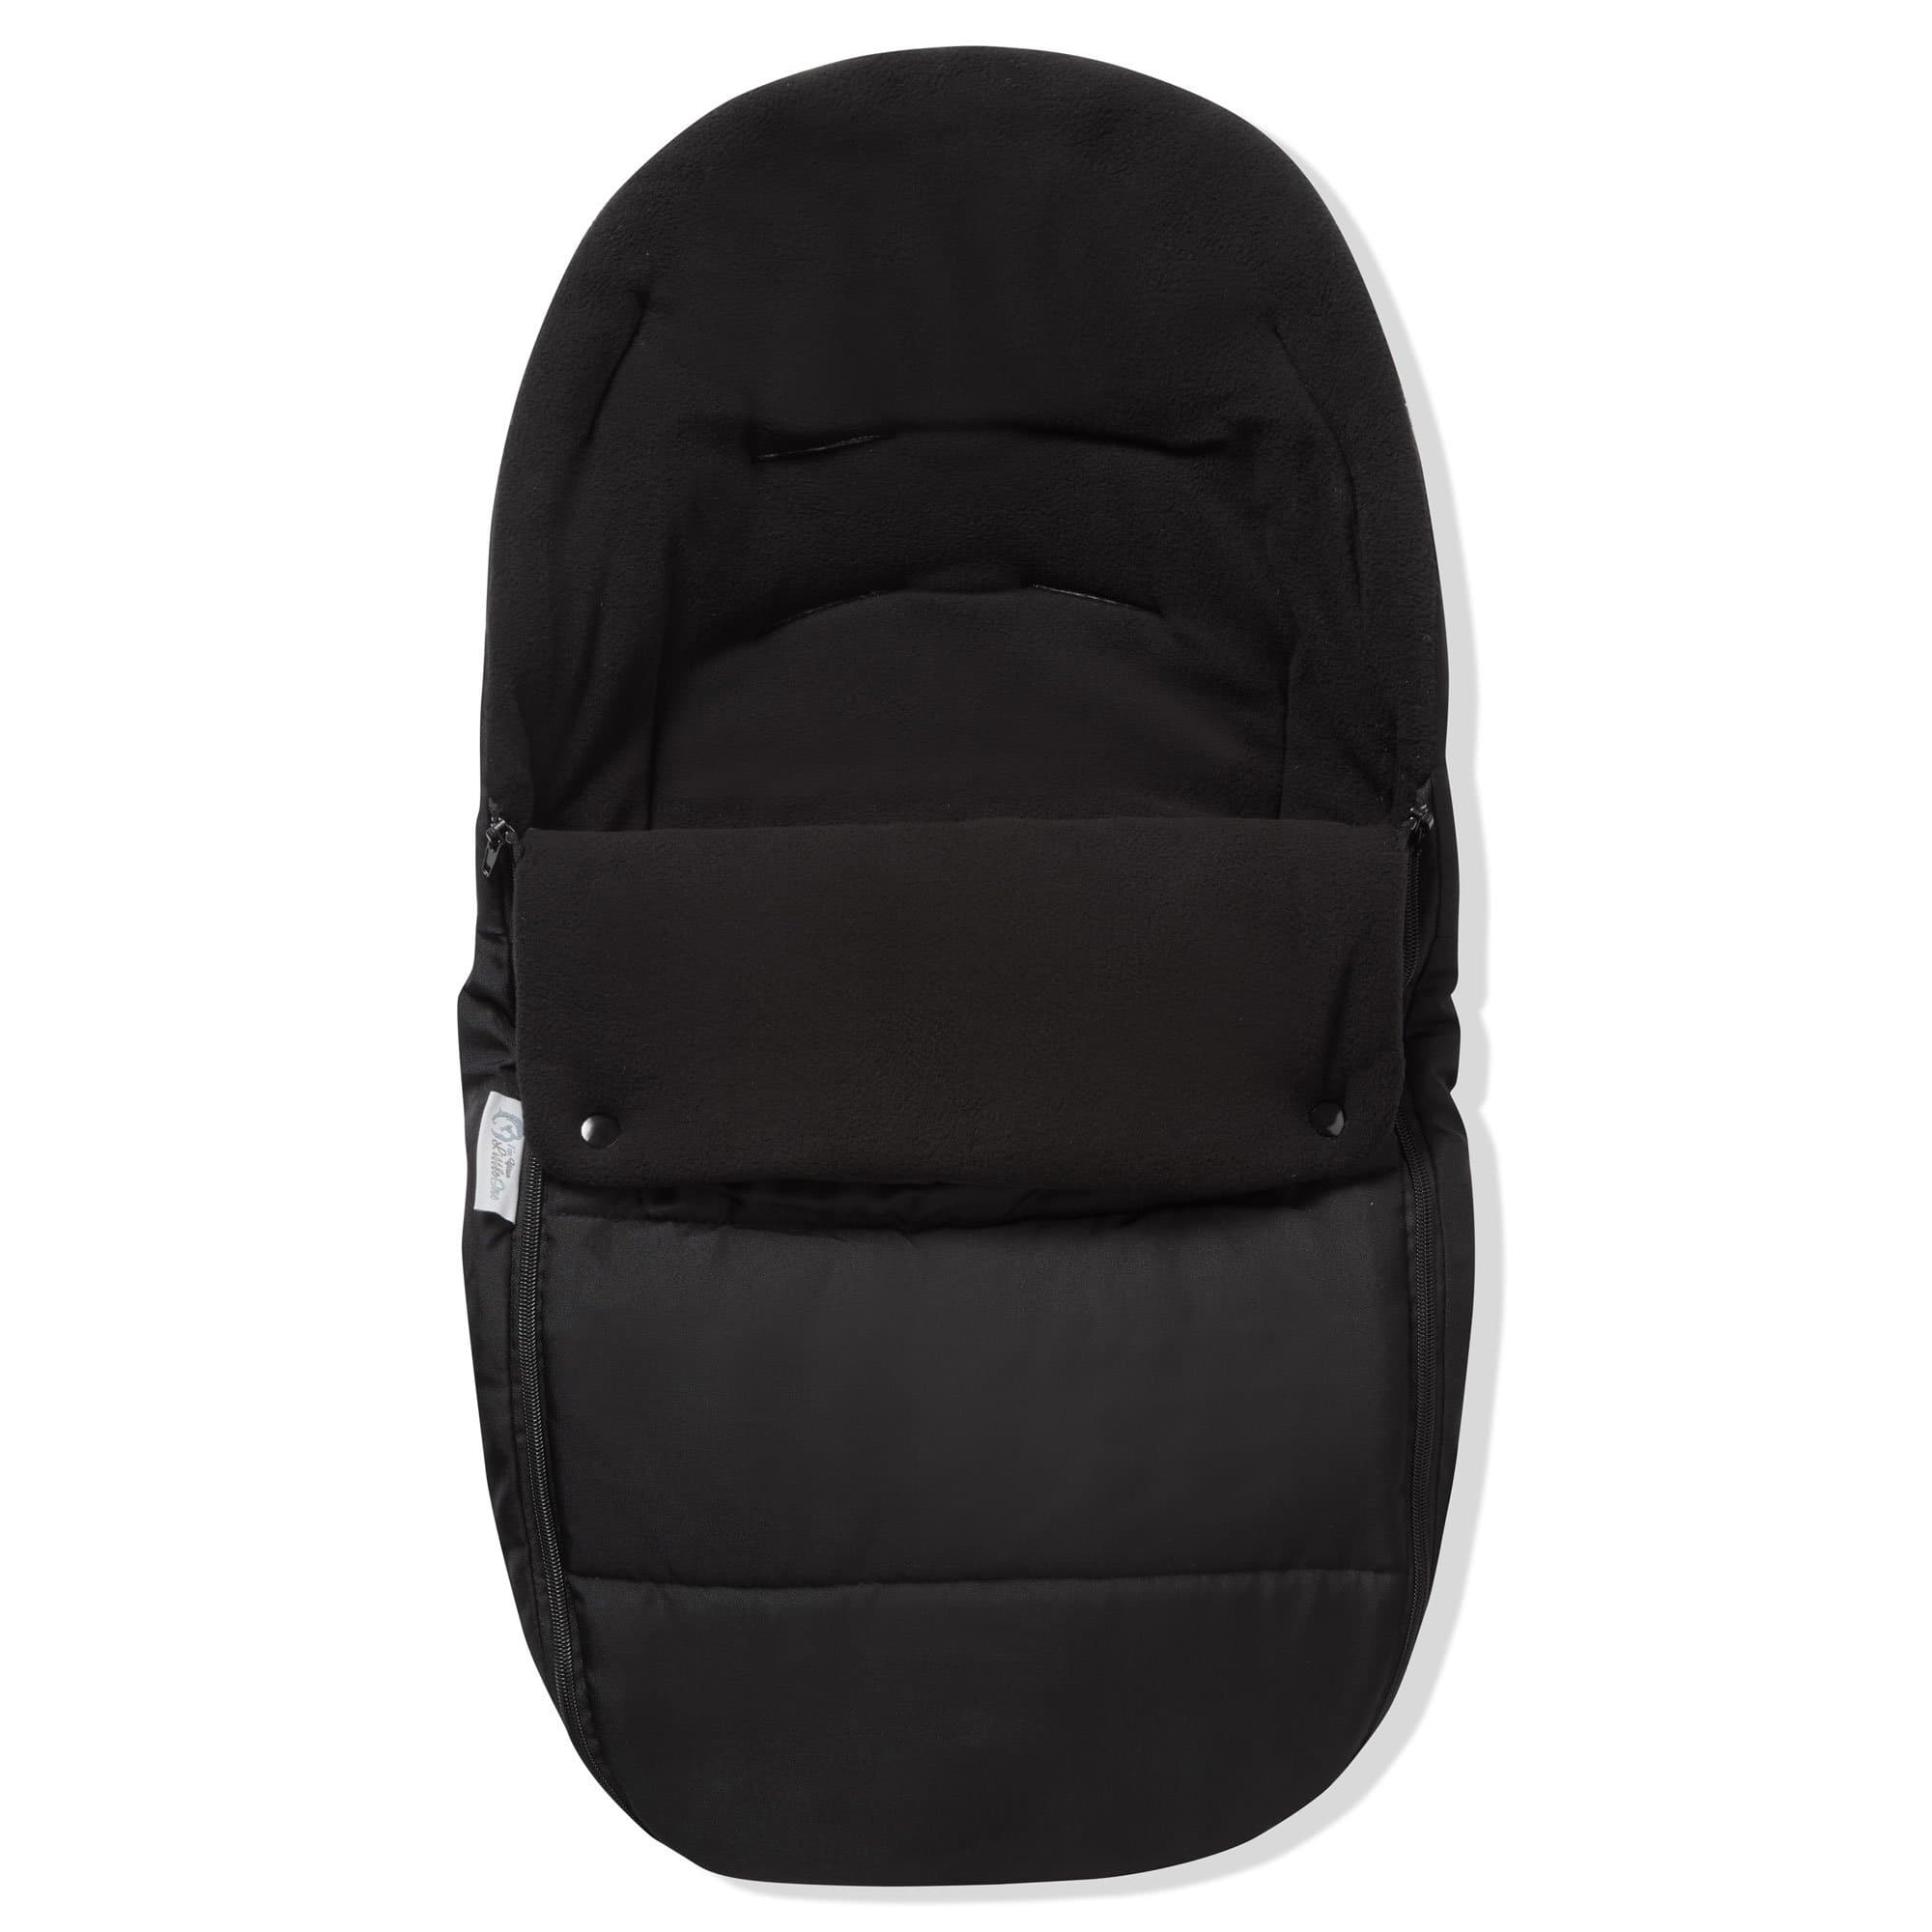 Premium Car Seat Footmuff / Cosy Toes Compatible with Venicci - Black Jack / Fits All Models | For Your Little One